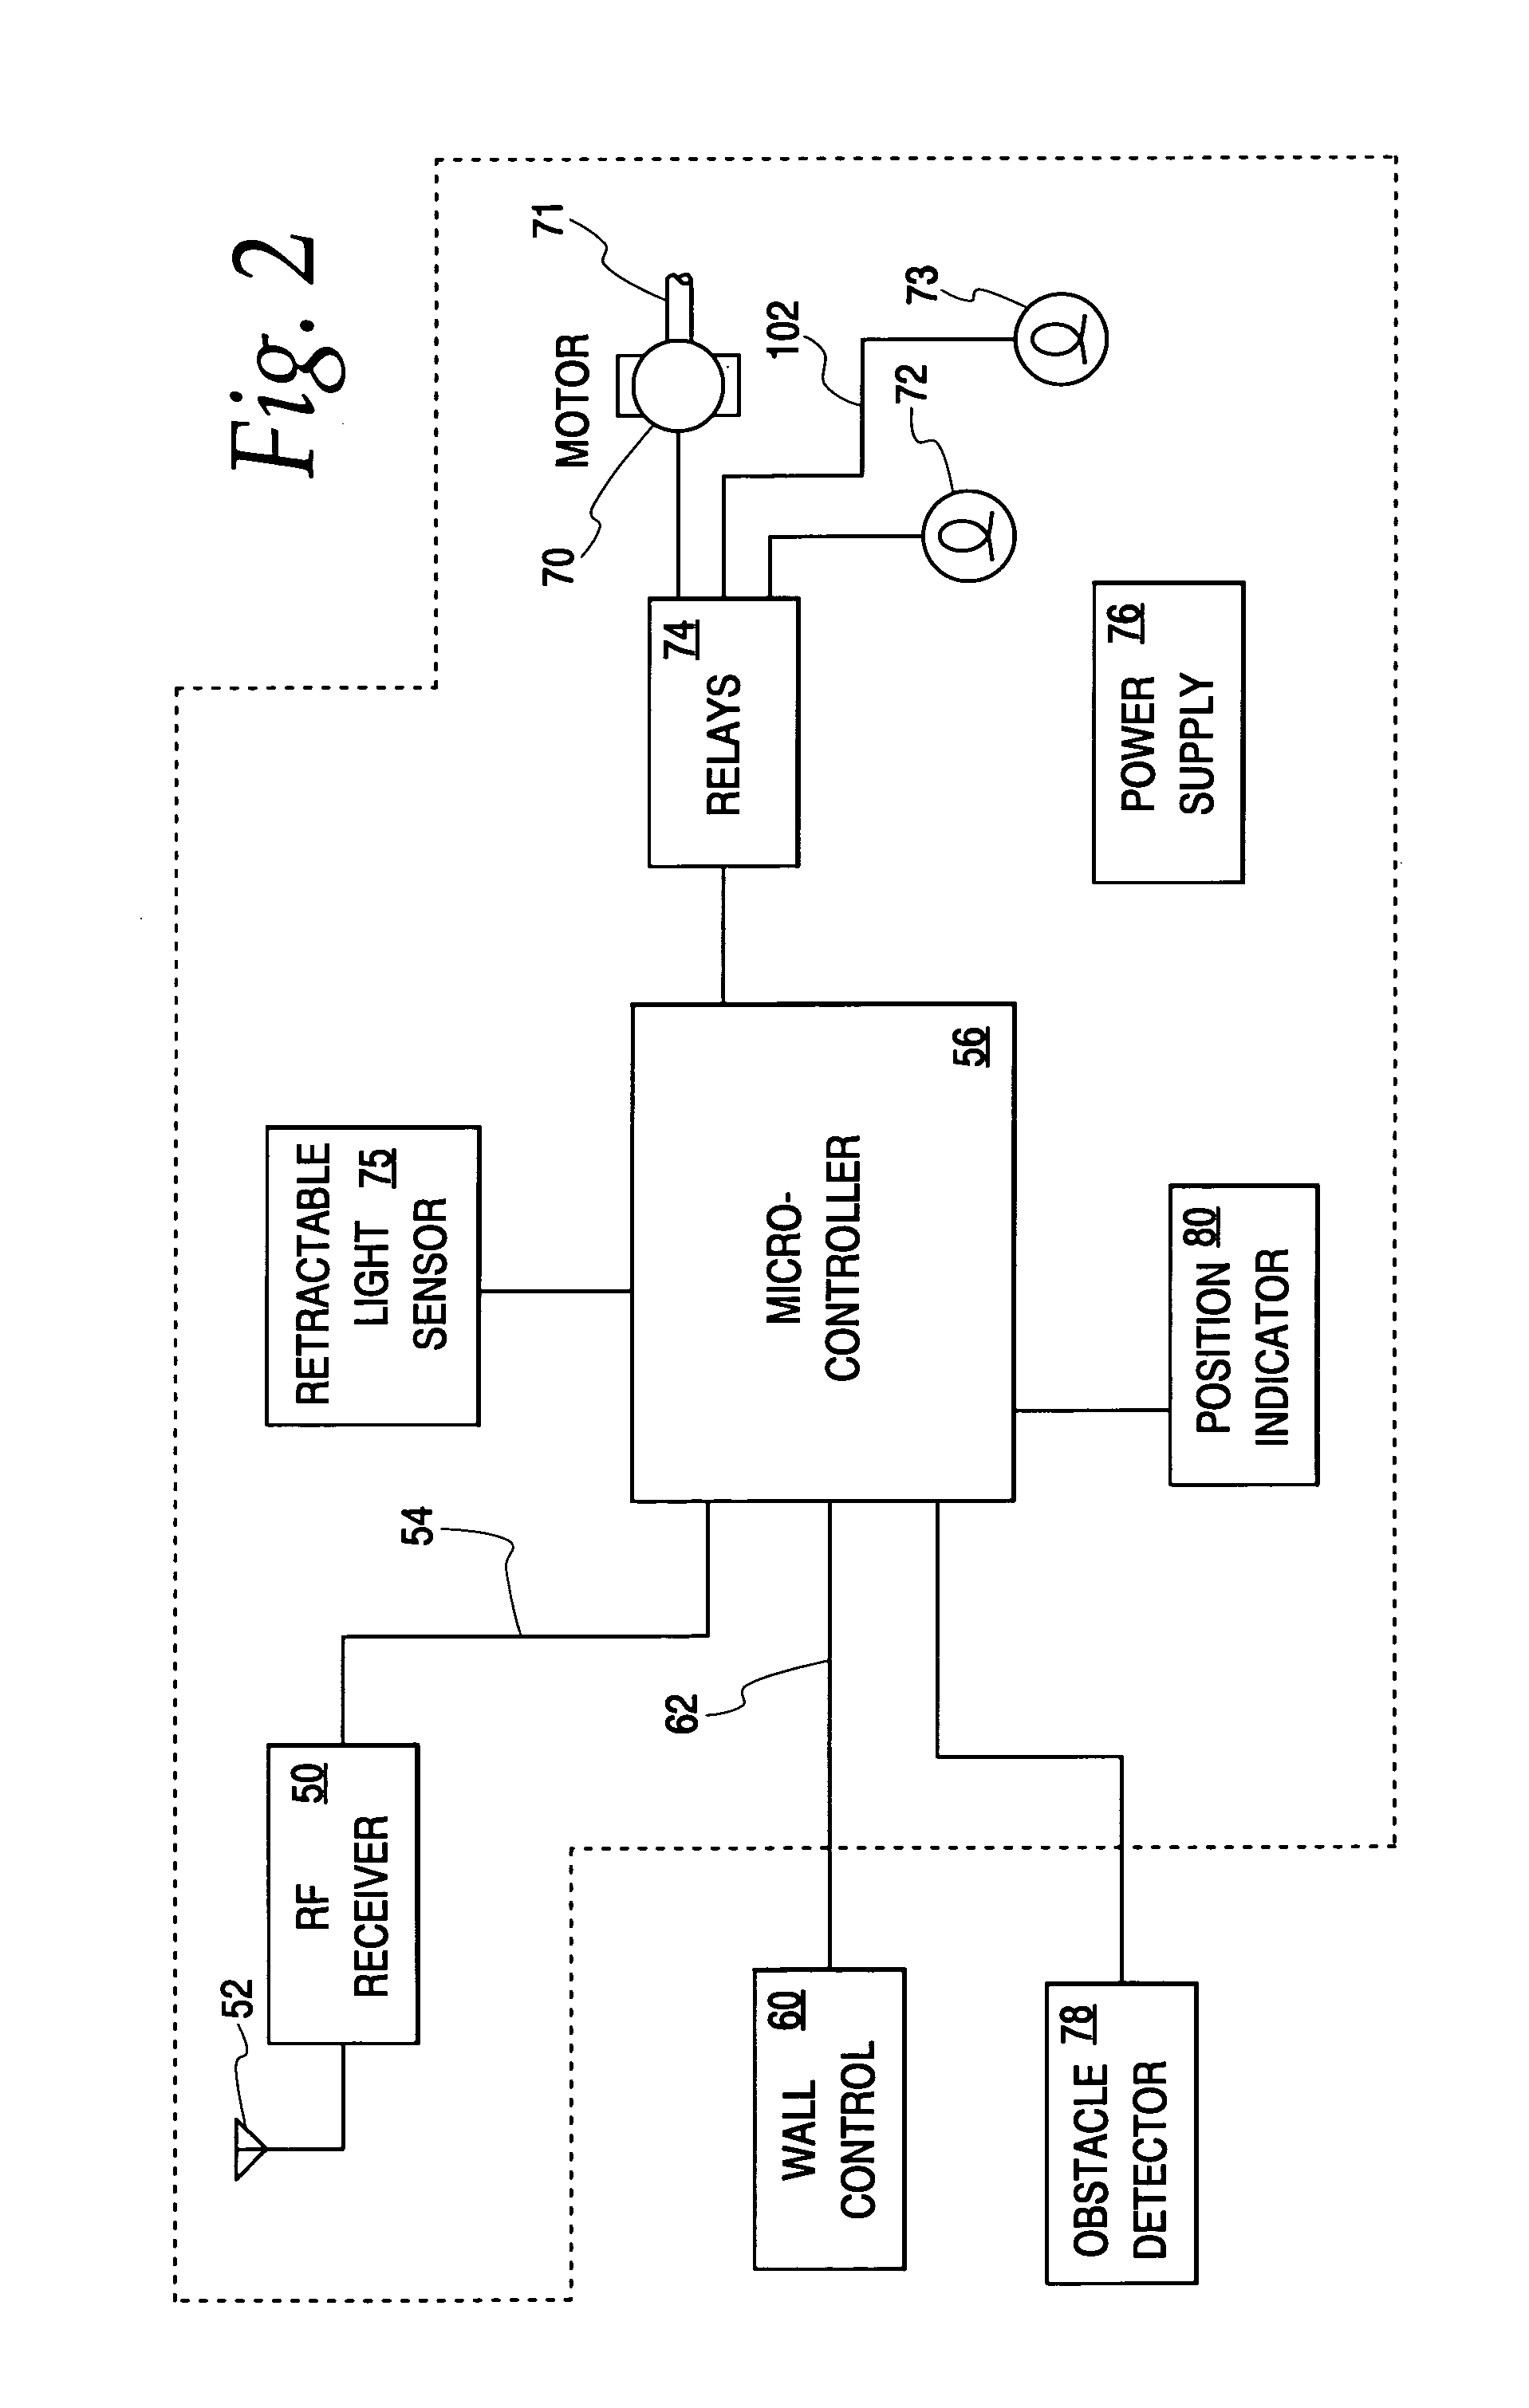 Movable light for use with a movable barrier operator